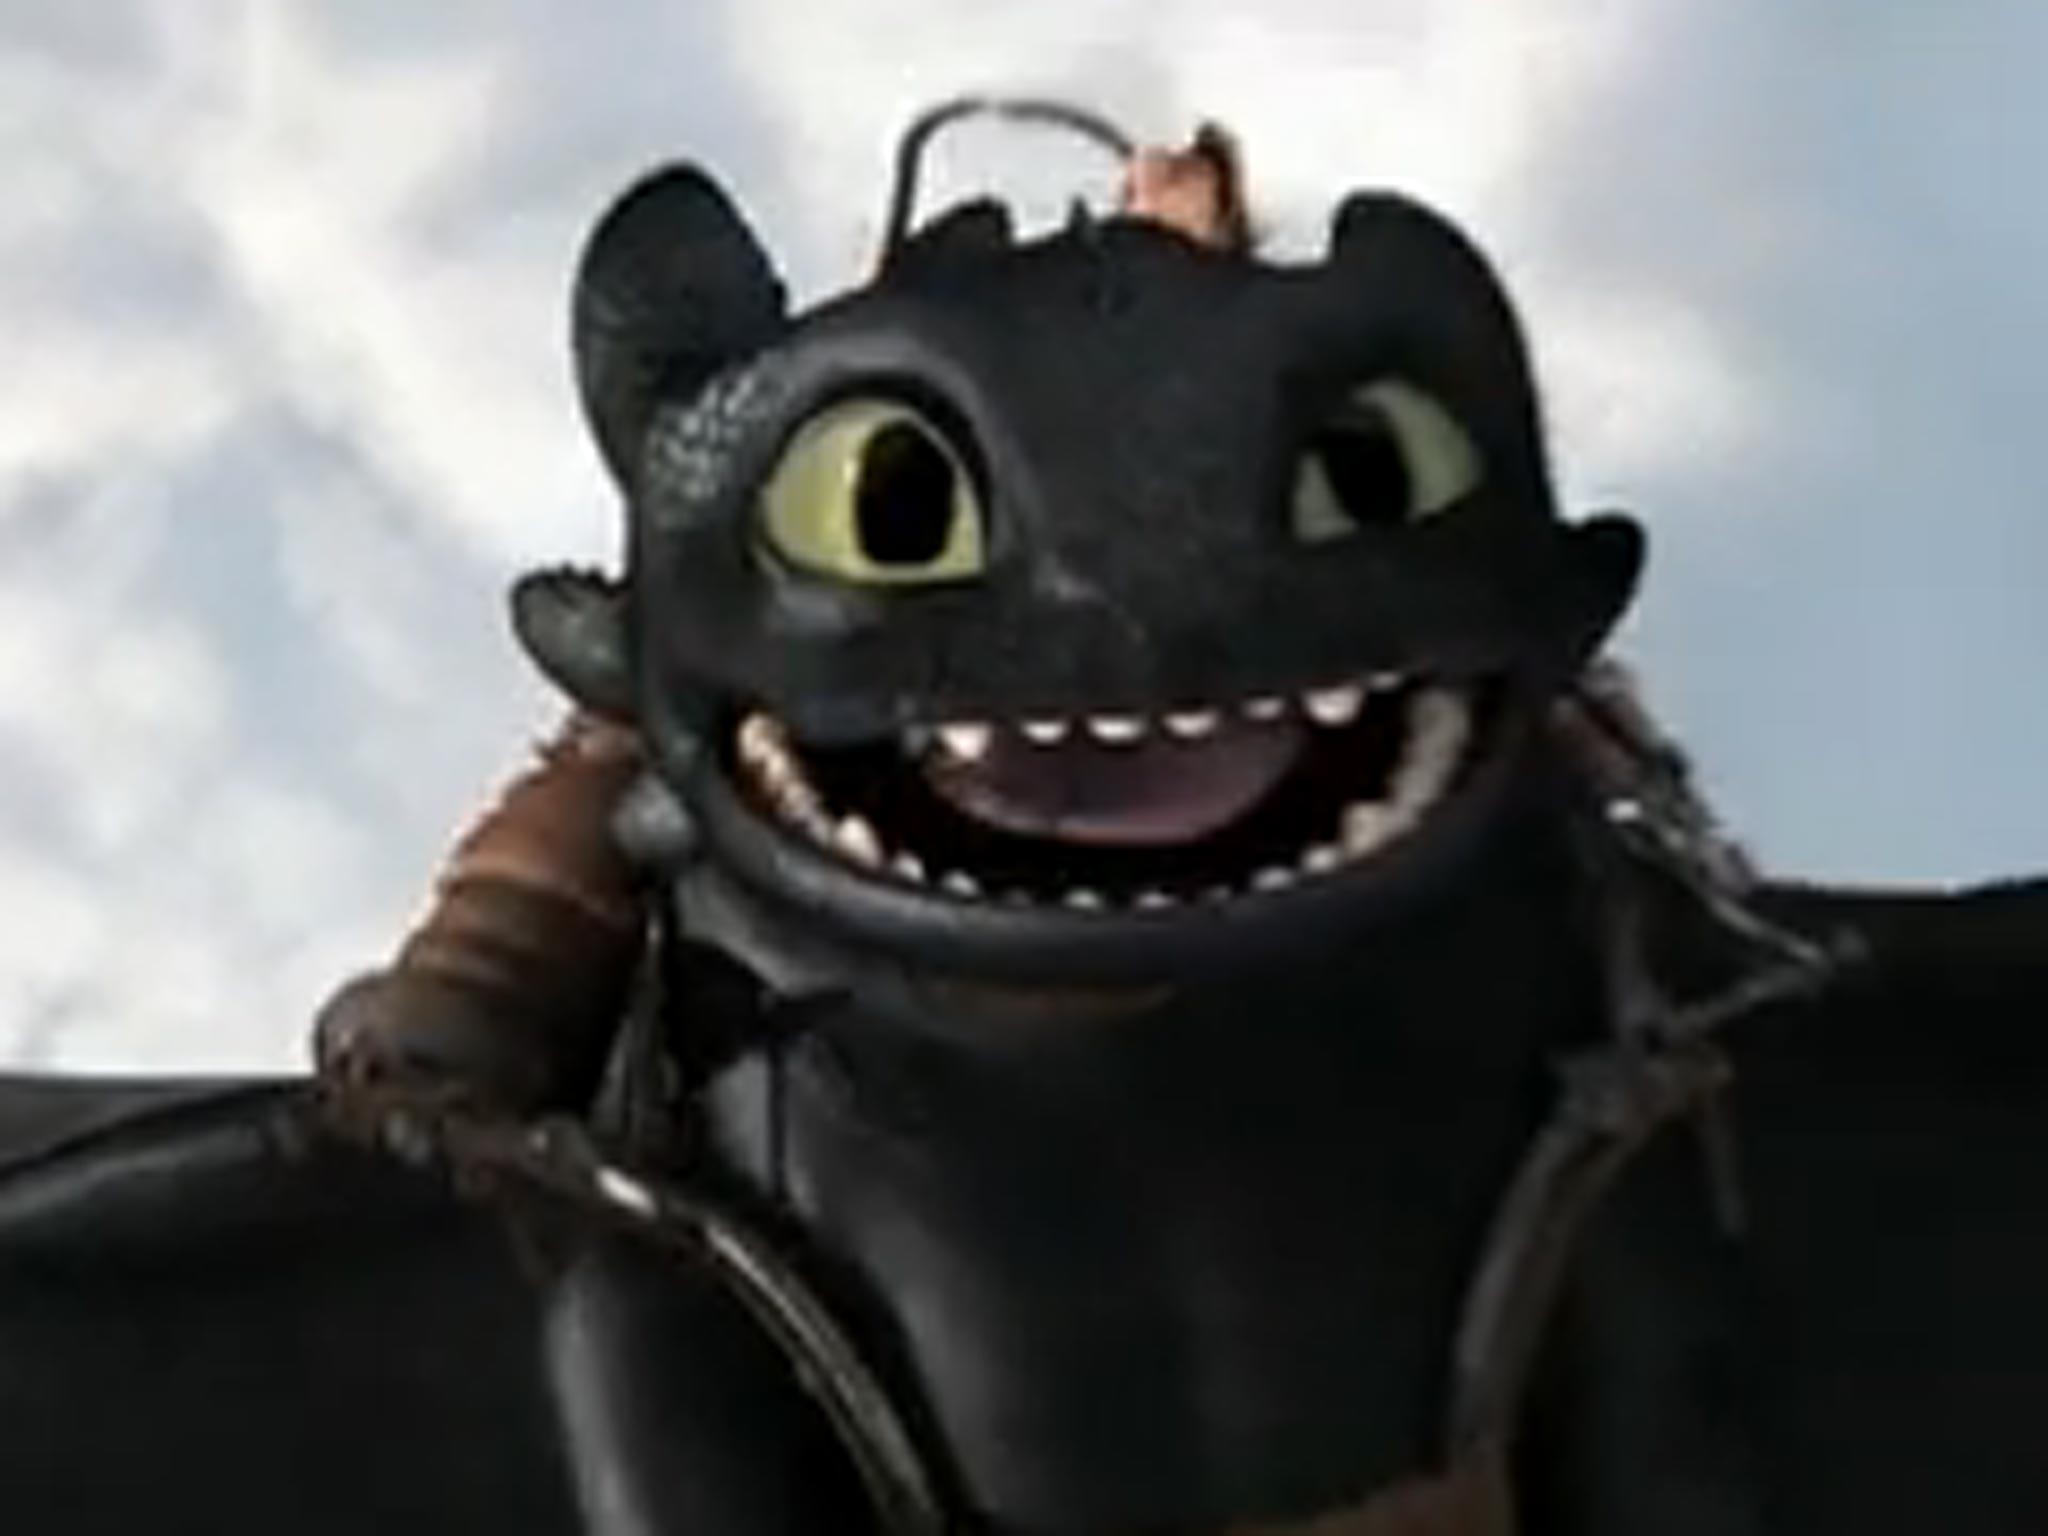 charles sweat recommends how to train your dragon sex fanfic pic